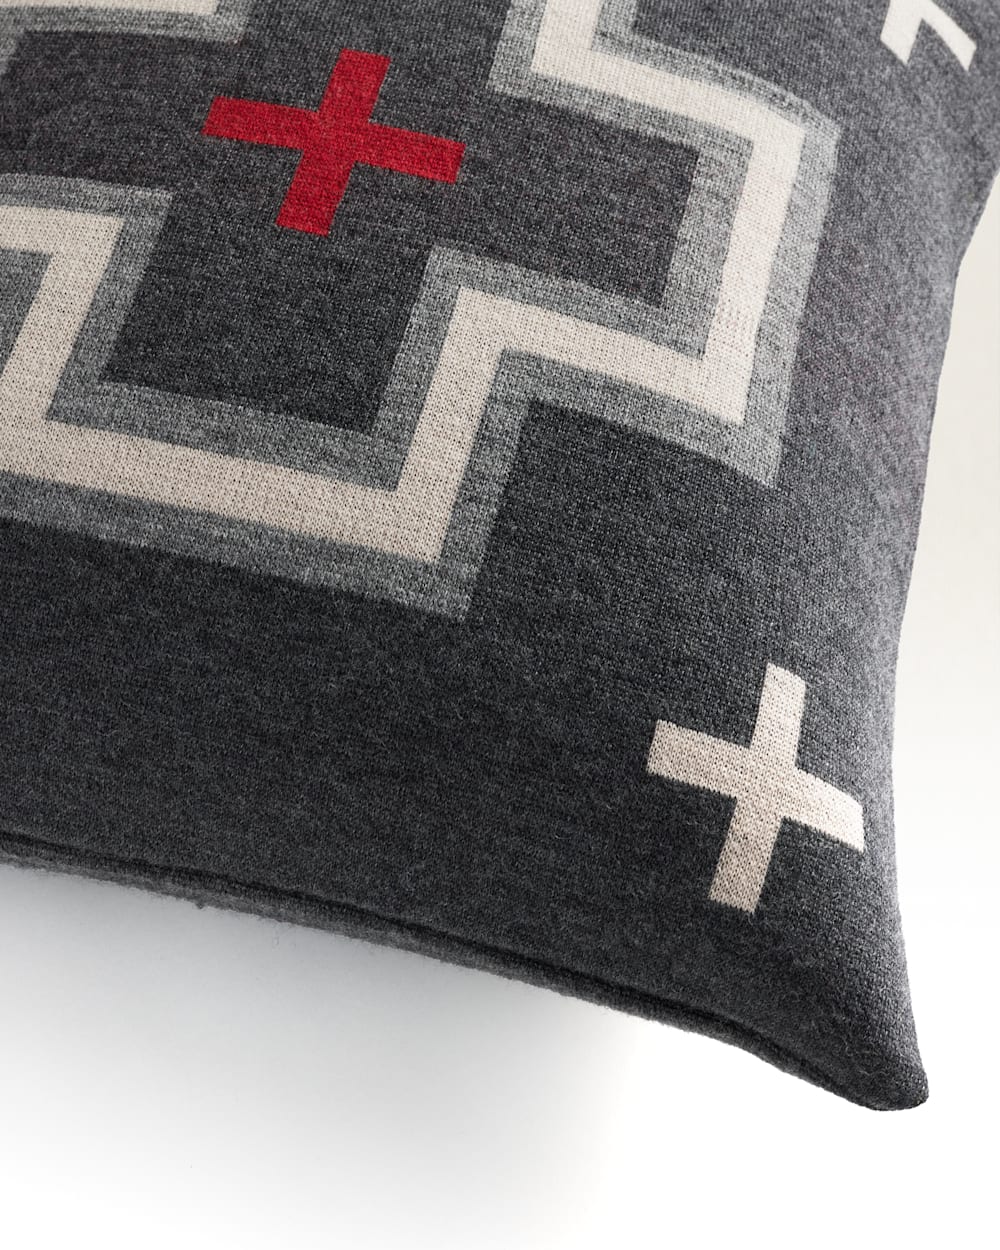 ALTERNATE VIEW OF SAN MIGUEL KNIT PILLOW IN GREY image number 2